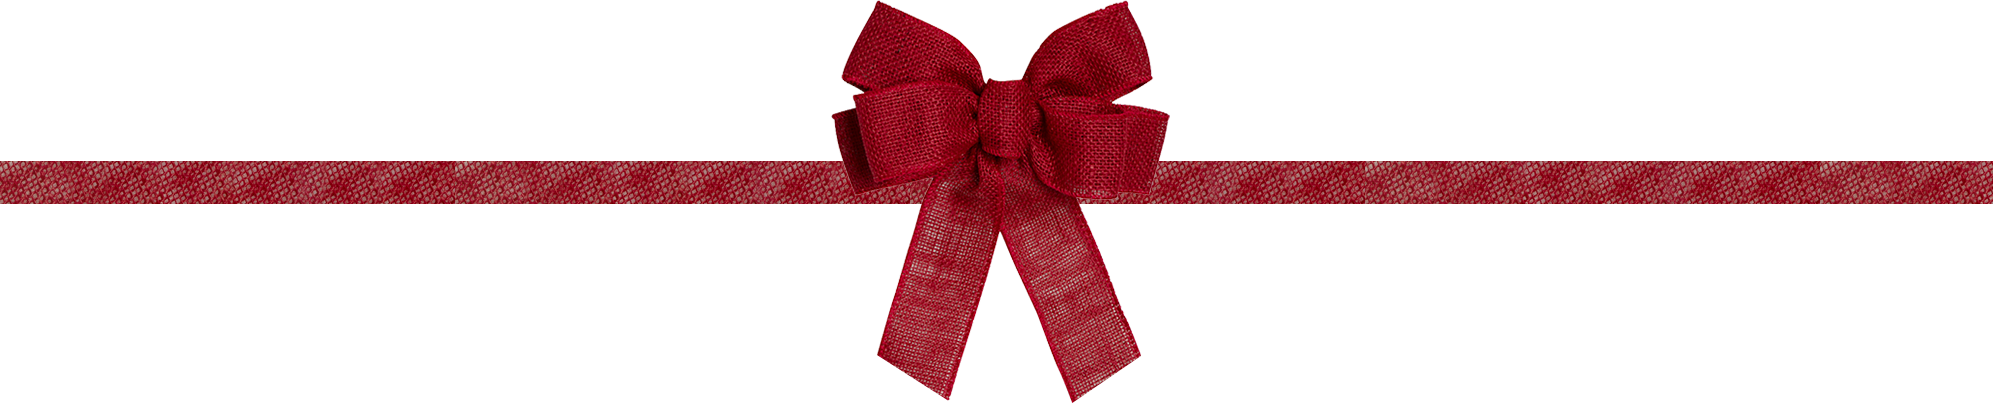 Red burlap gift wrapping bow.